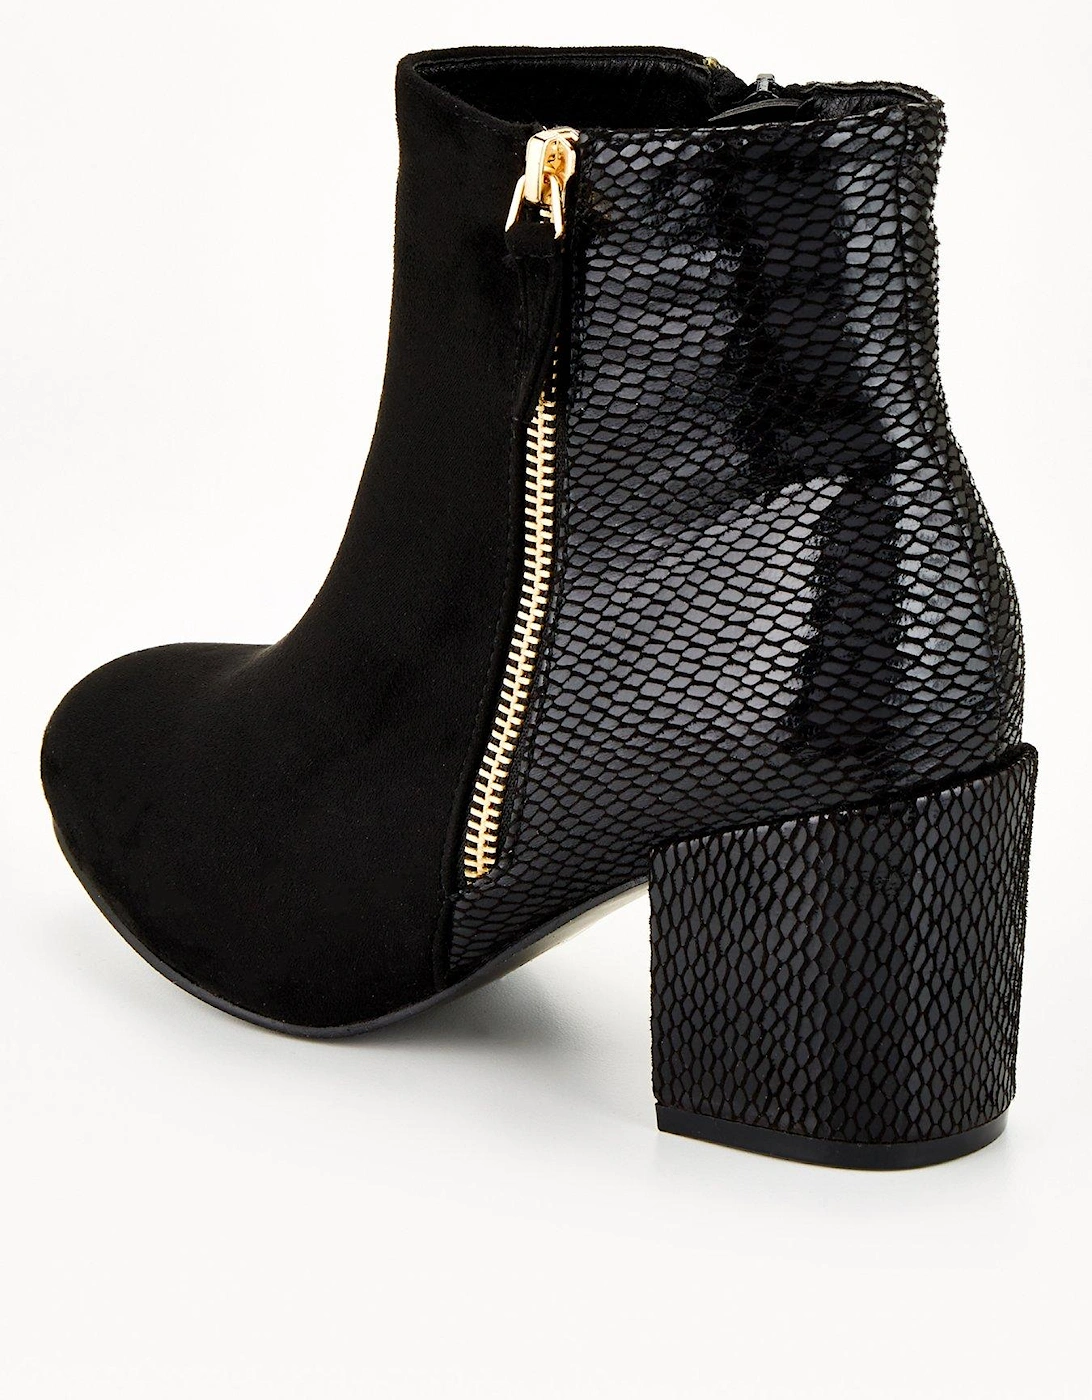 Extra Wide Fit Block Heel Ankle Boot - Black